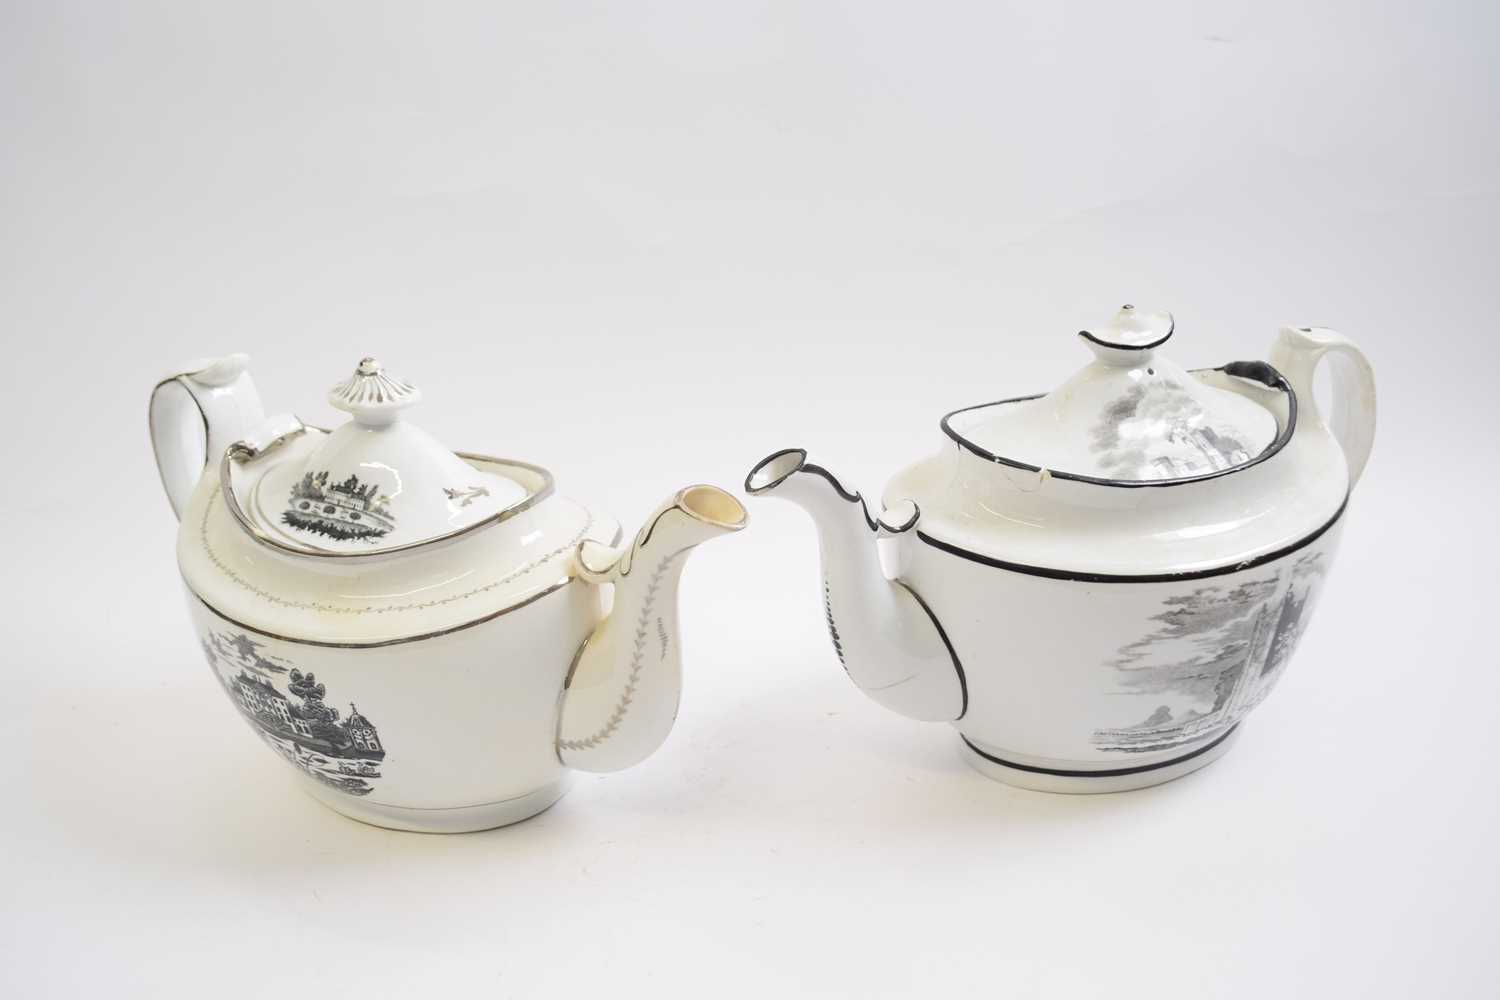 Two early 19th Century English porcelain teapots decorated with black printed scenes - Image 2 of 2